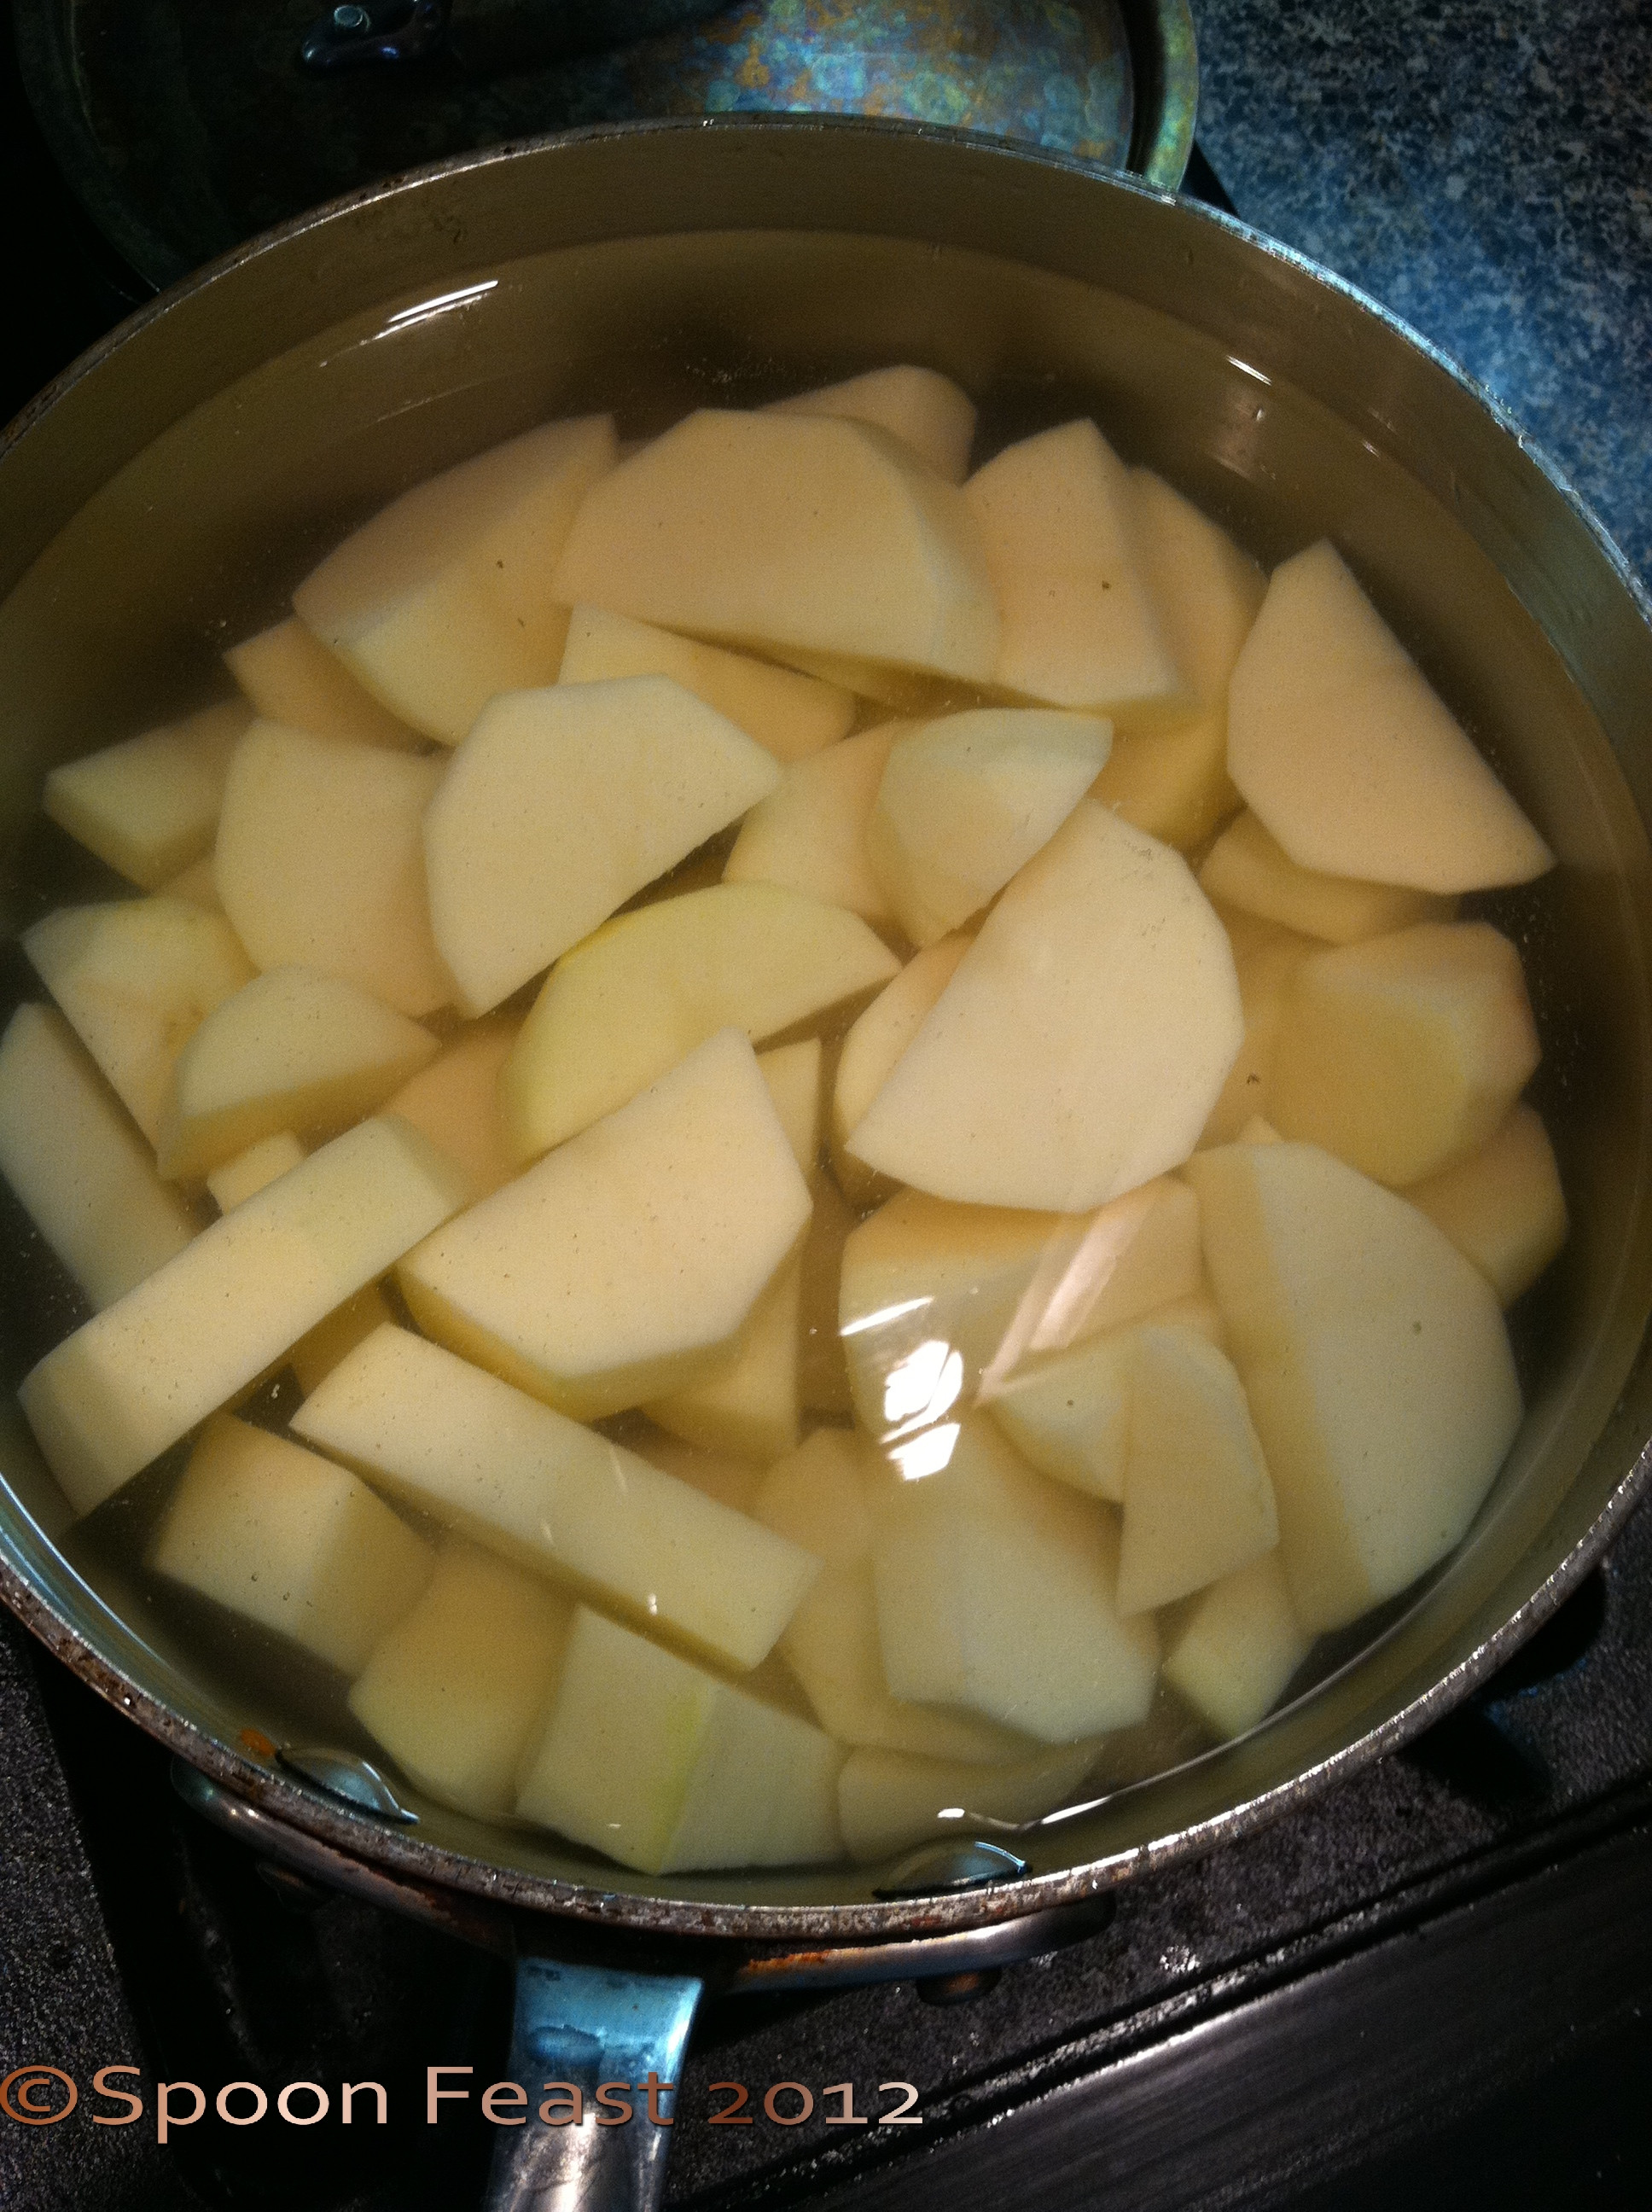 How To Boil Potatoes For Mashed Potatoes
 How to Boil Potatoes for Making Mashed Potatoes